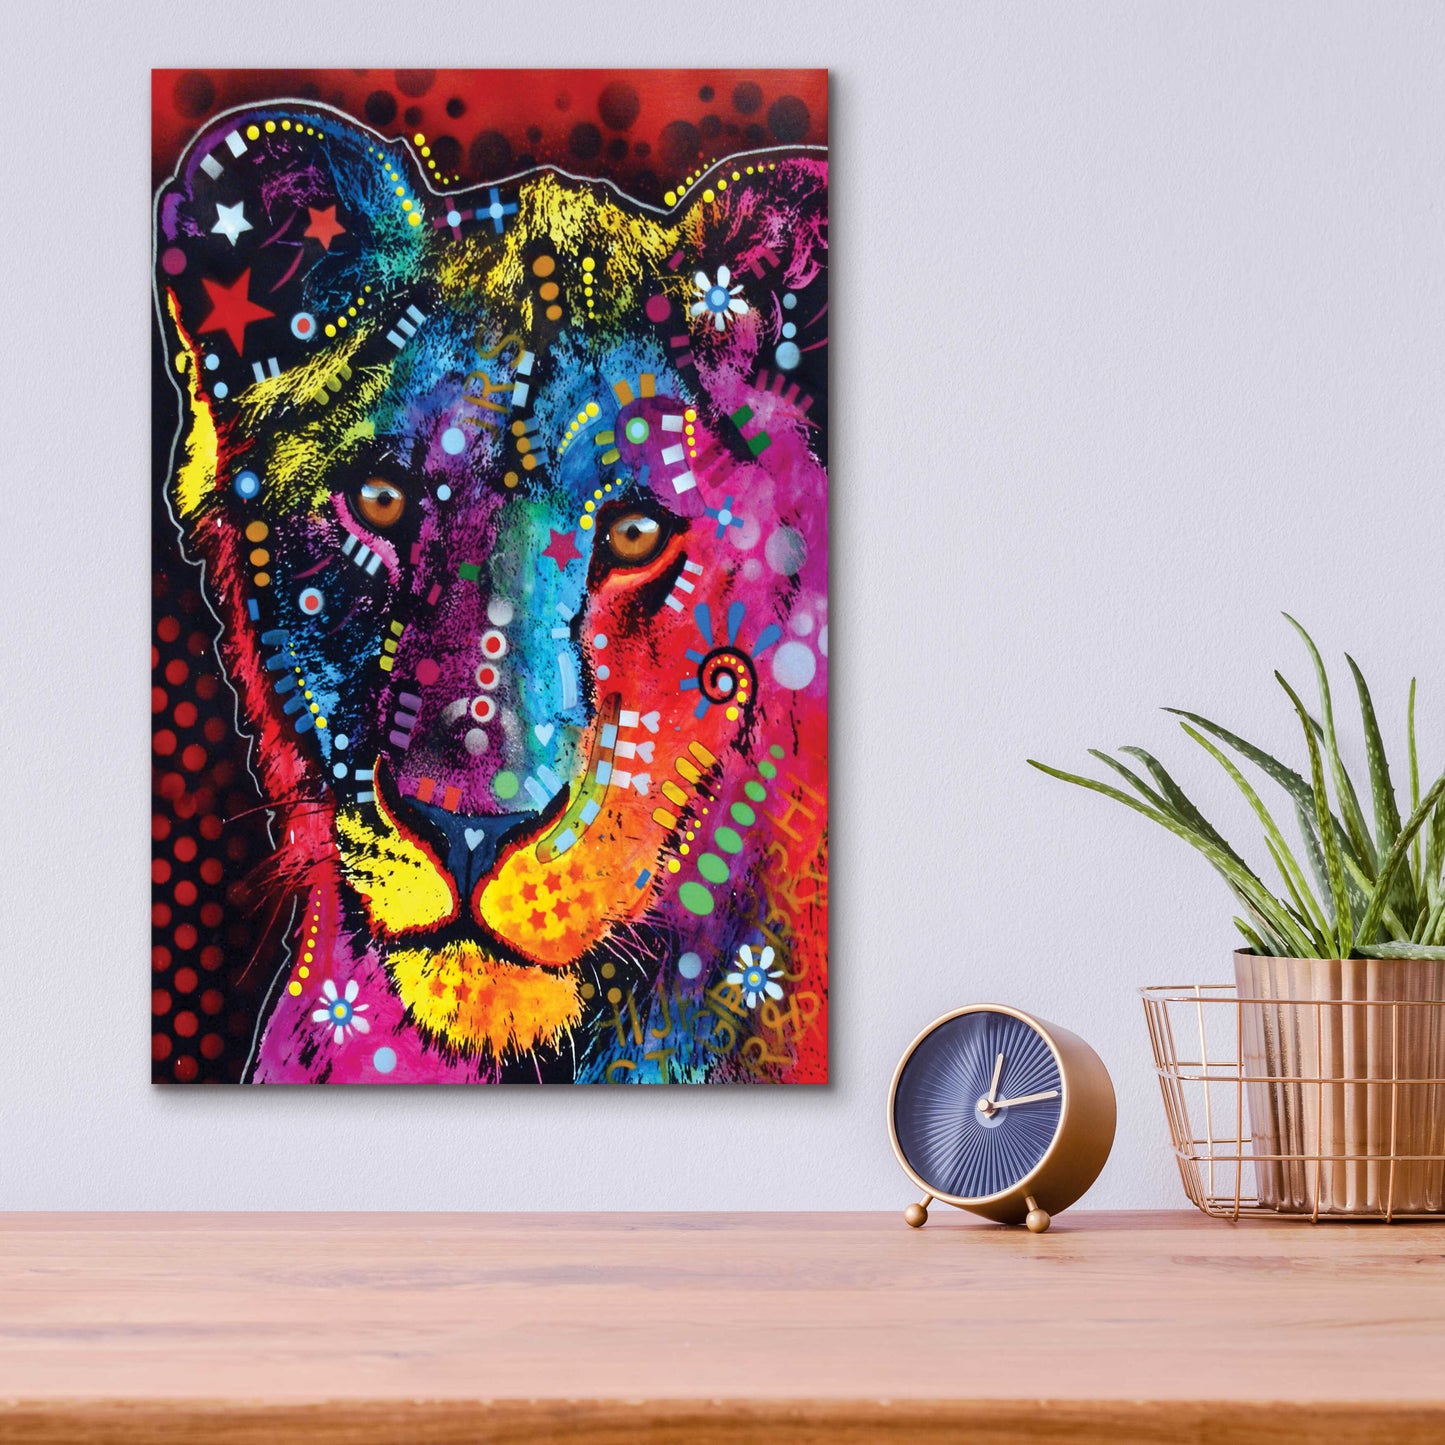 Epic Art 'Young Lion' by Dean Russo, Acrylic Glass Wall Art,12x16